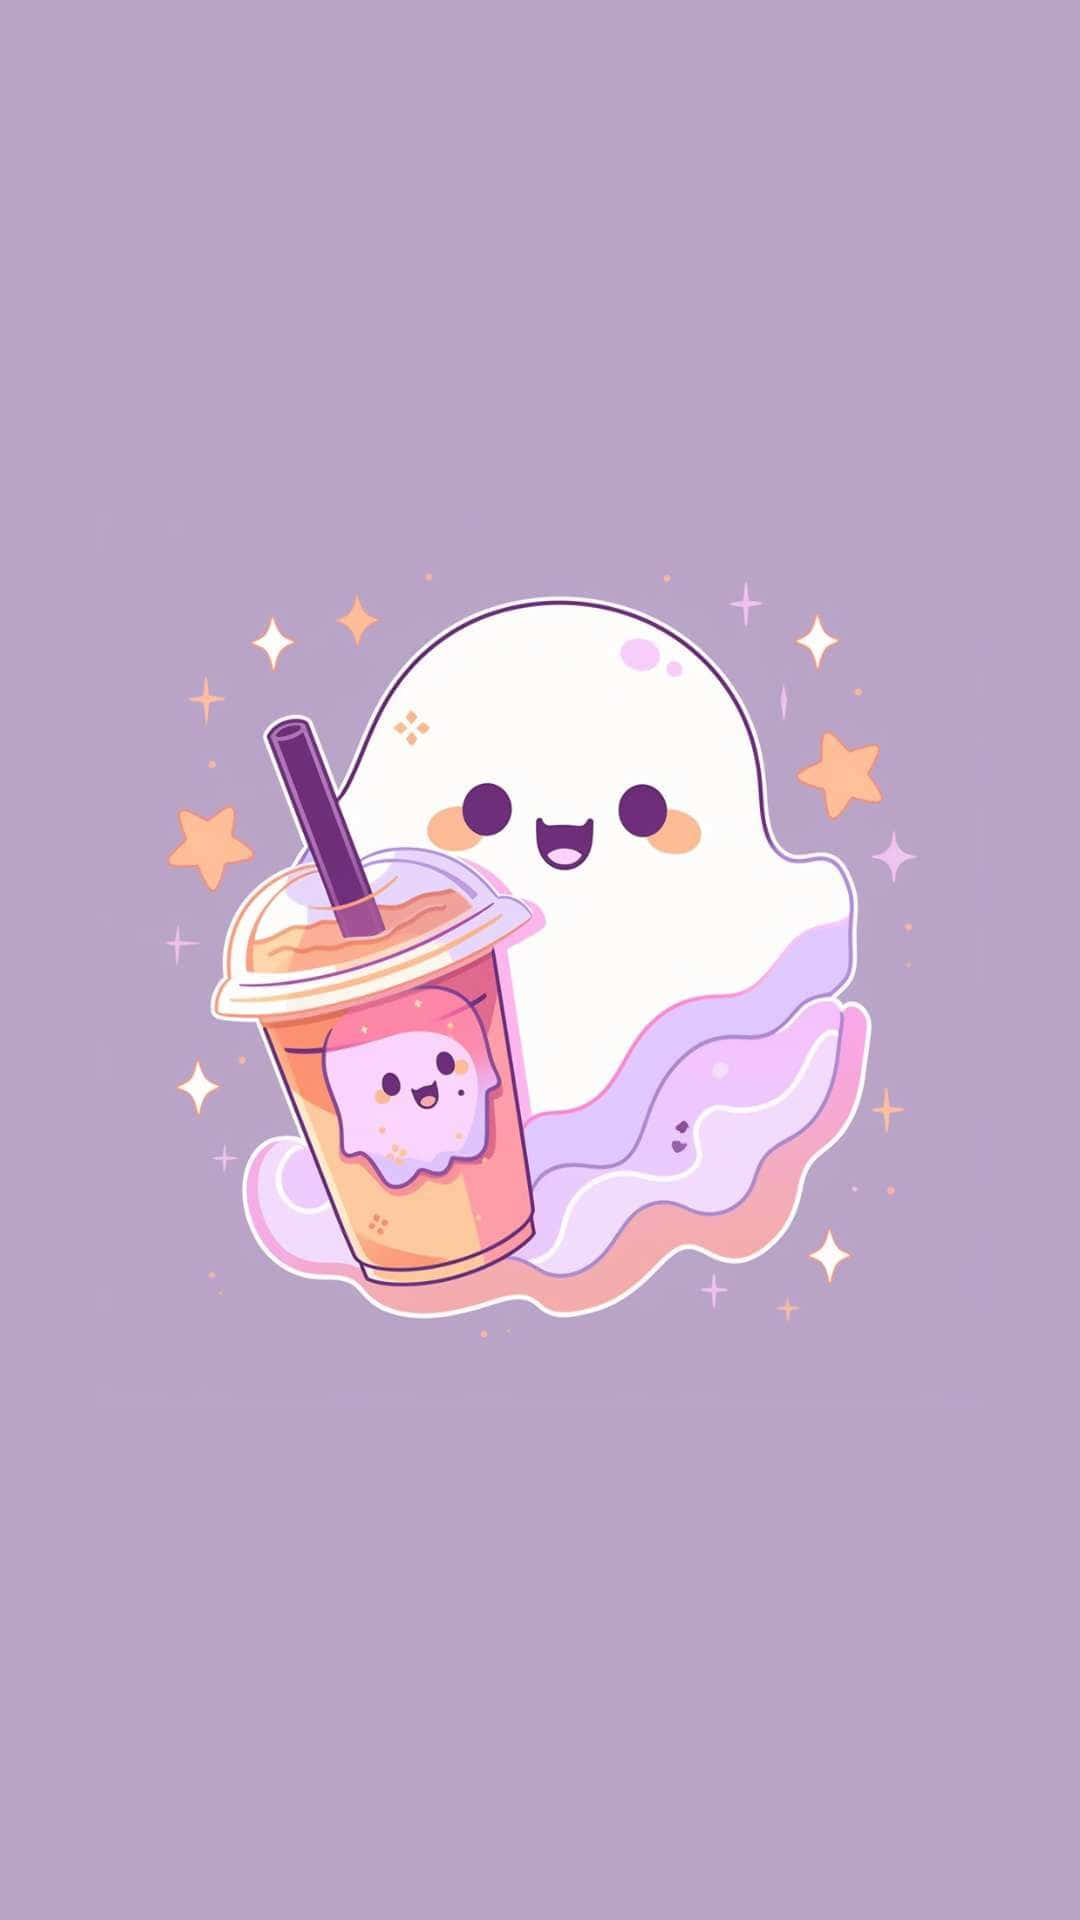 Cute Ghost With Boba Drink Illustration Wallpaper